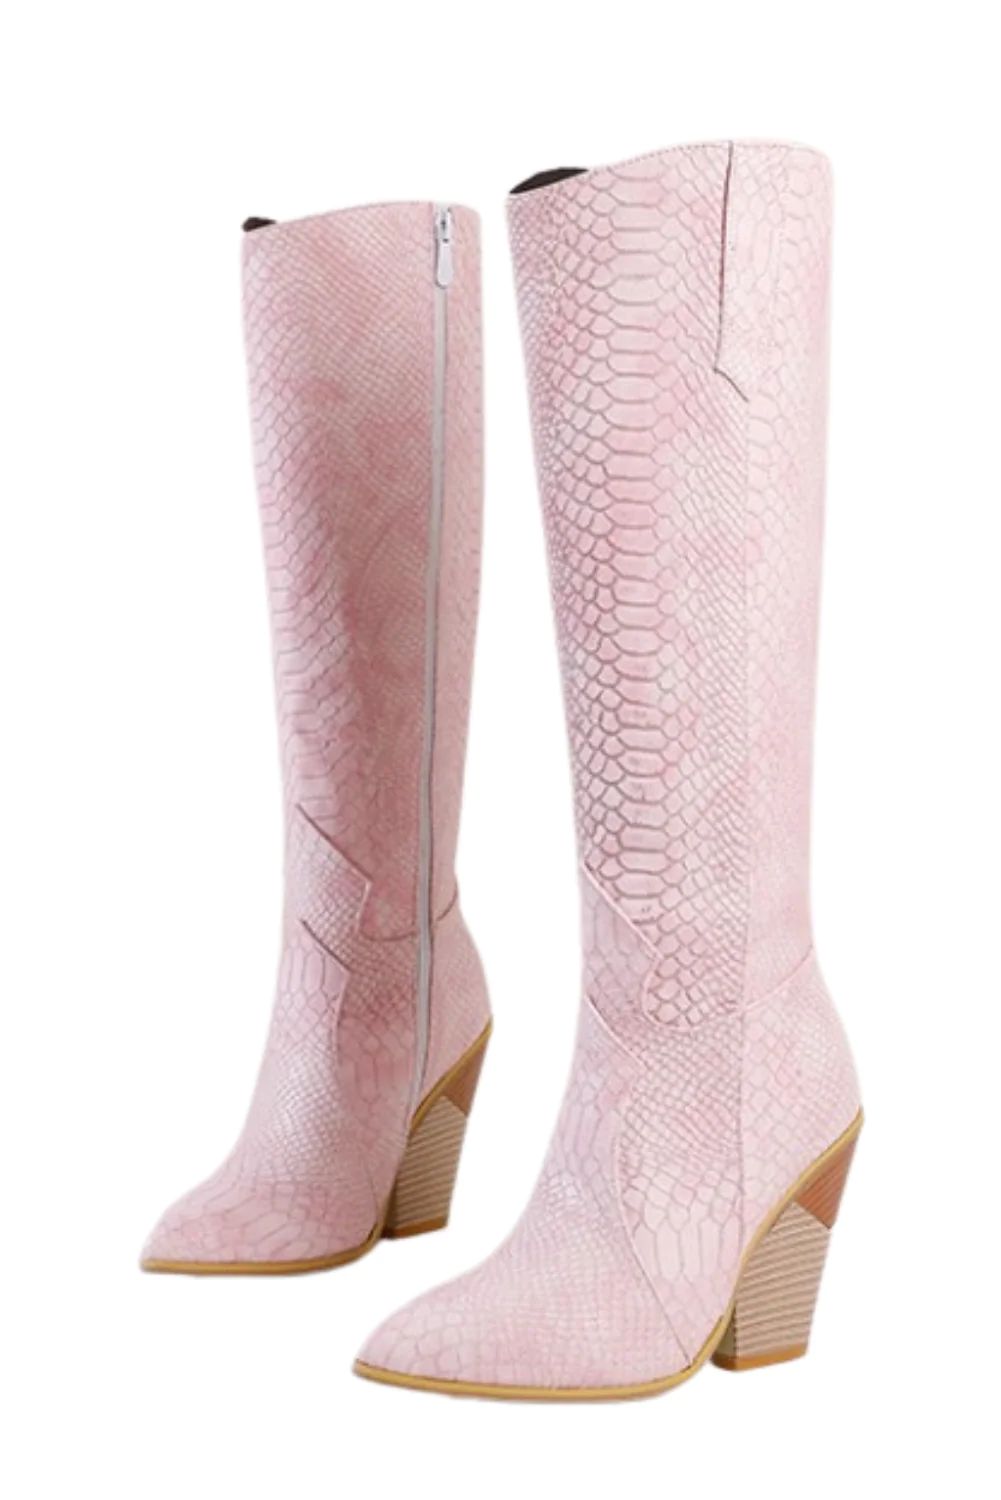 'Connie' Heeled Snakeskin Boots (3 Colors) | Goodnight Macaroon